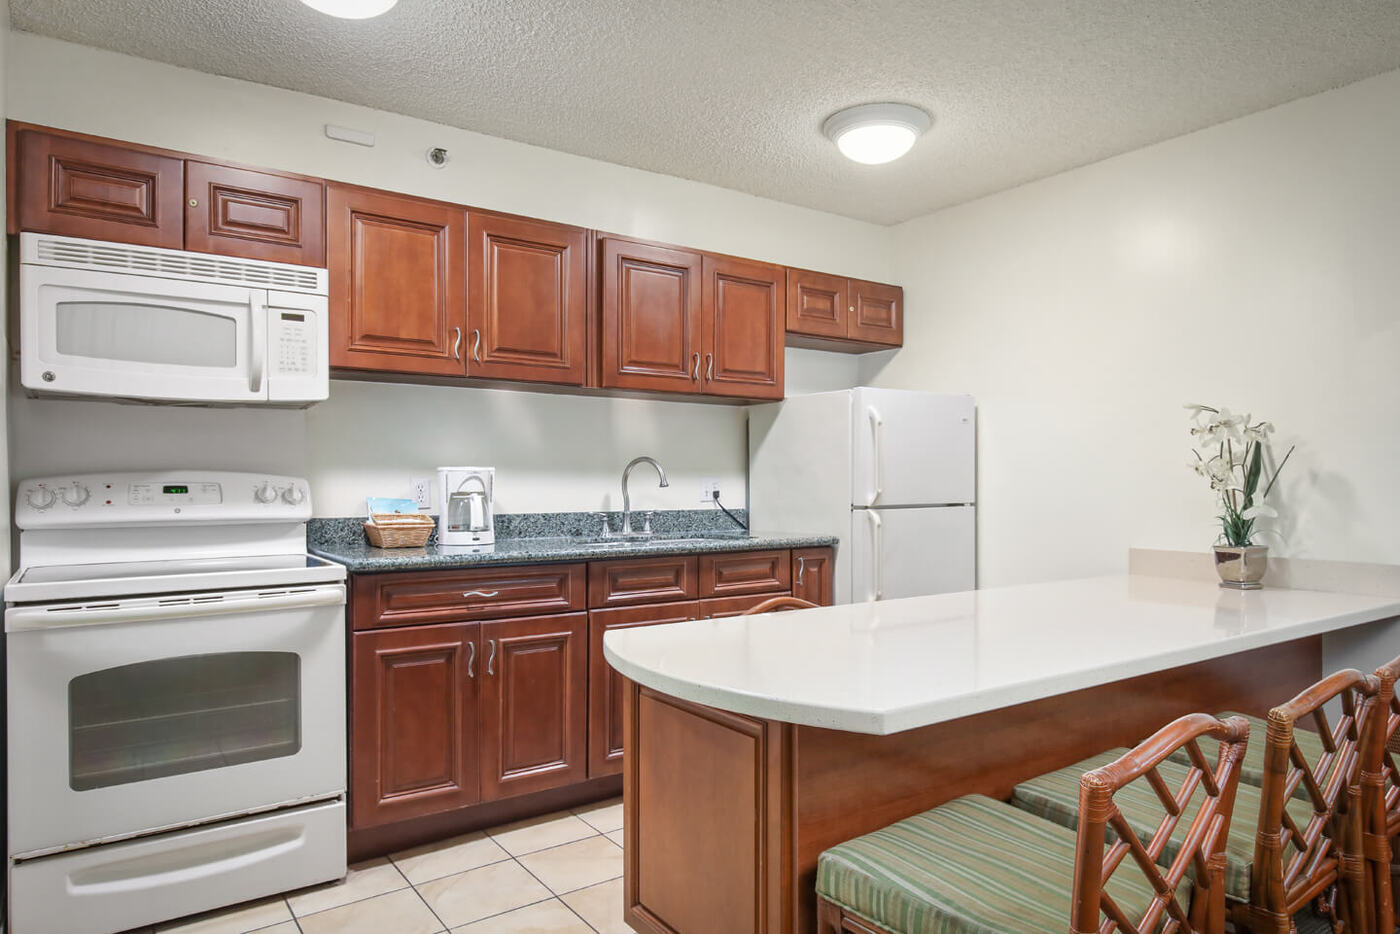 1-Bedroom Deluxe Ocean View fully equipped kitchen and dining area.